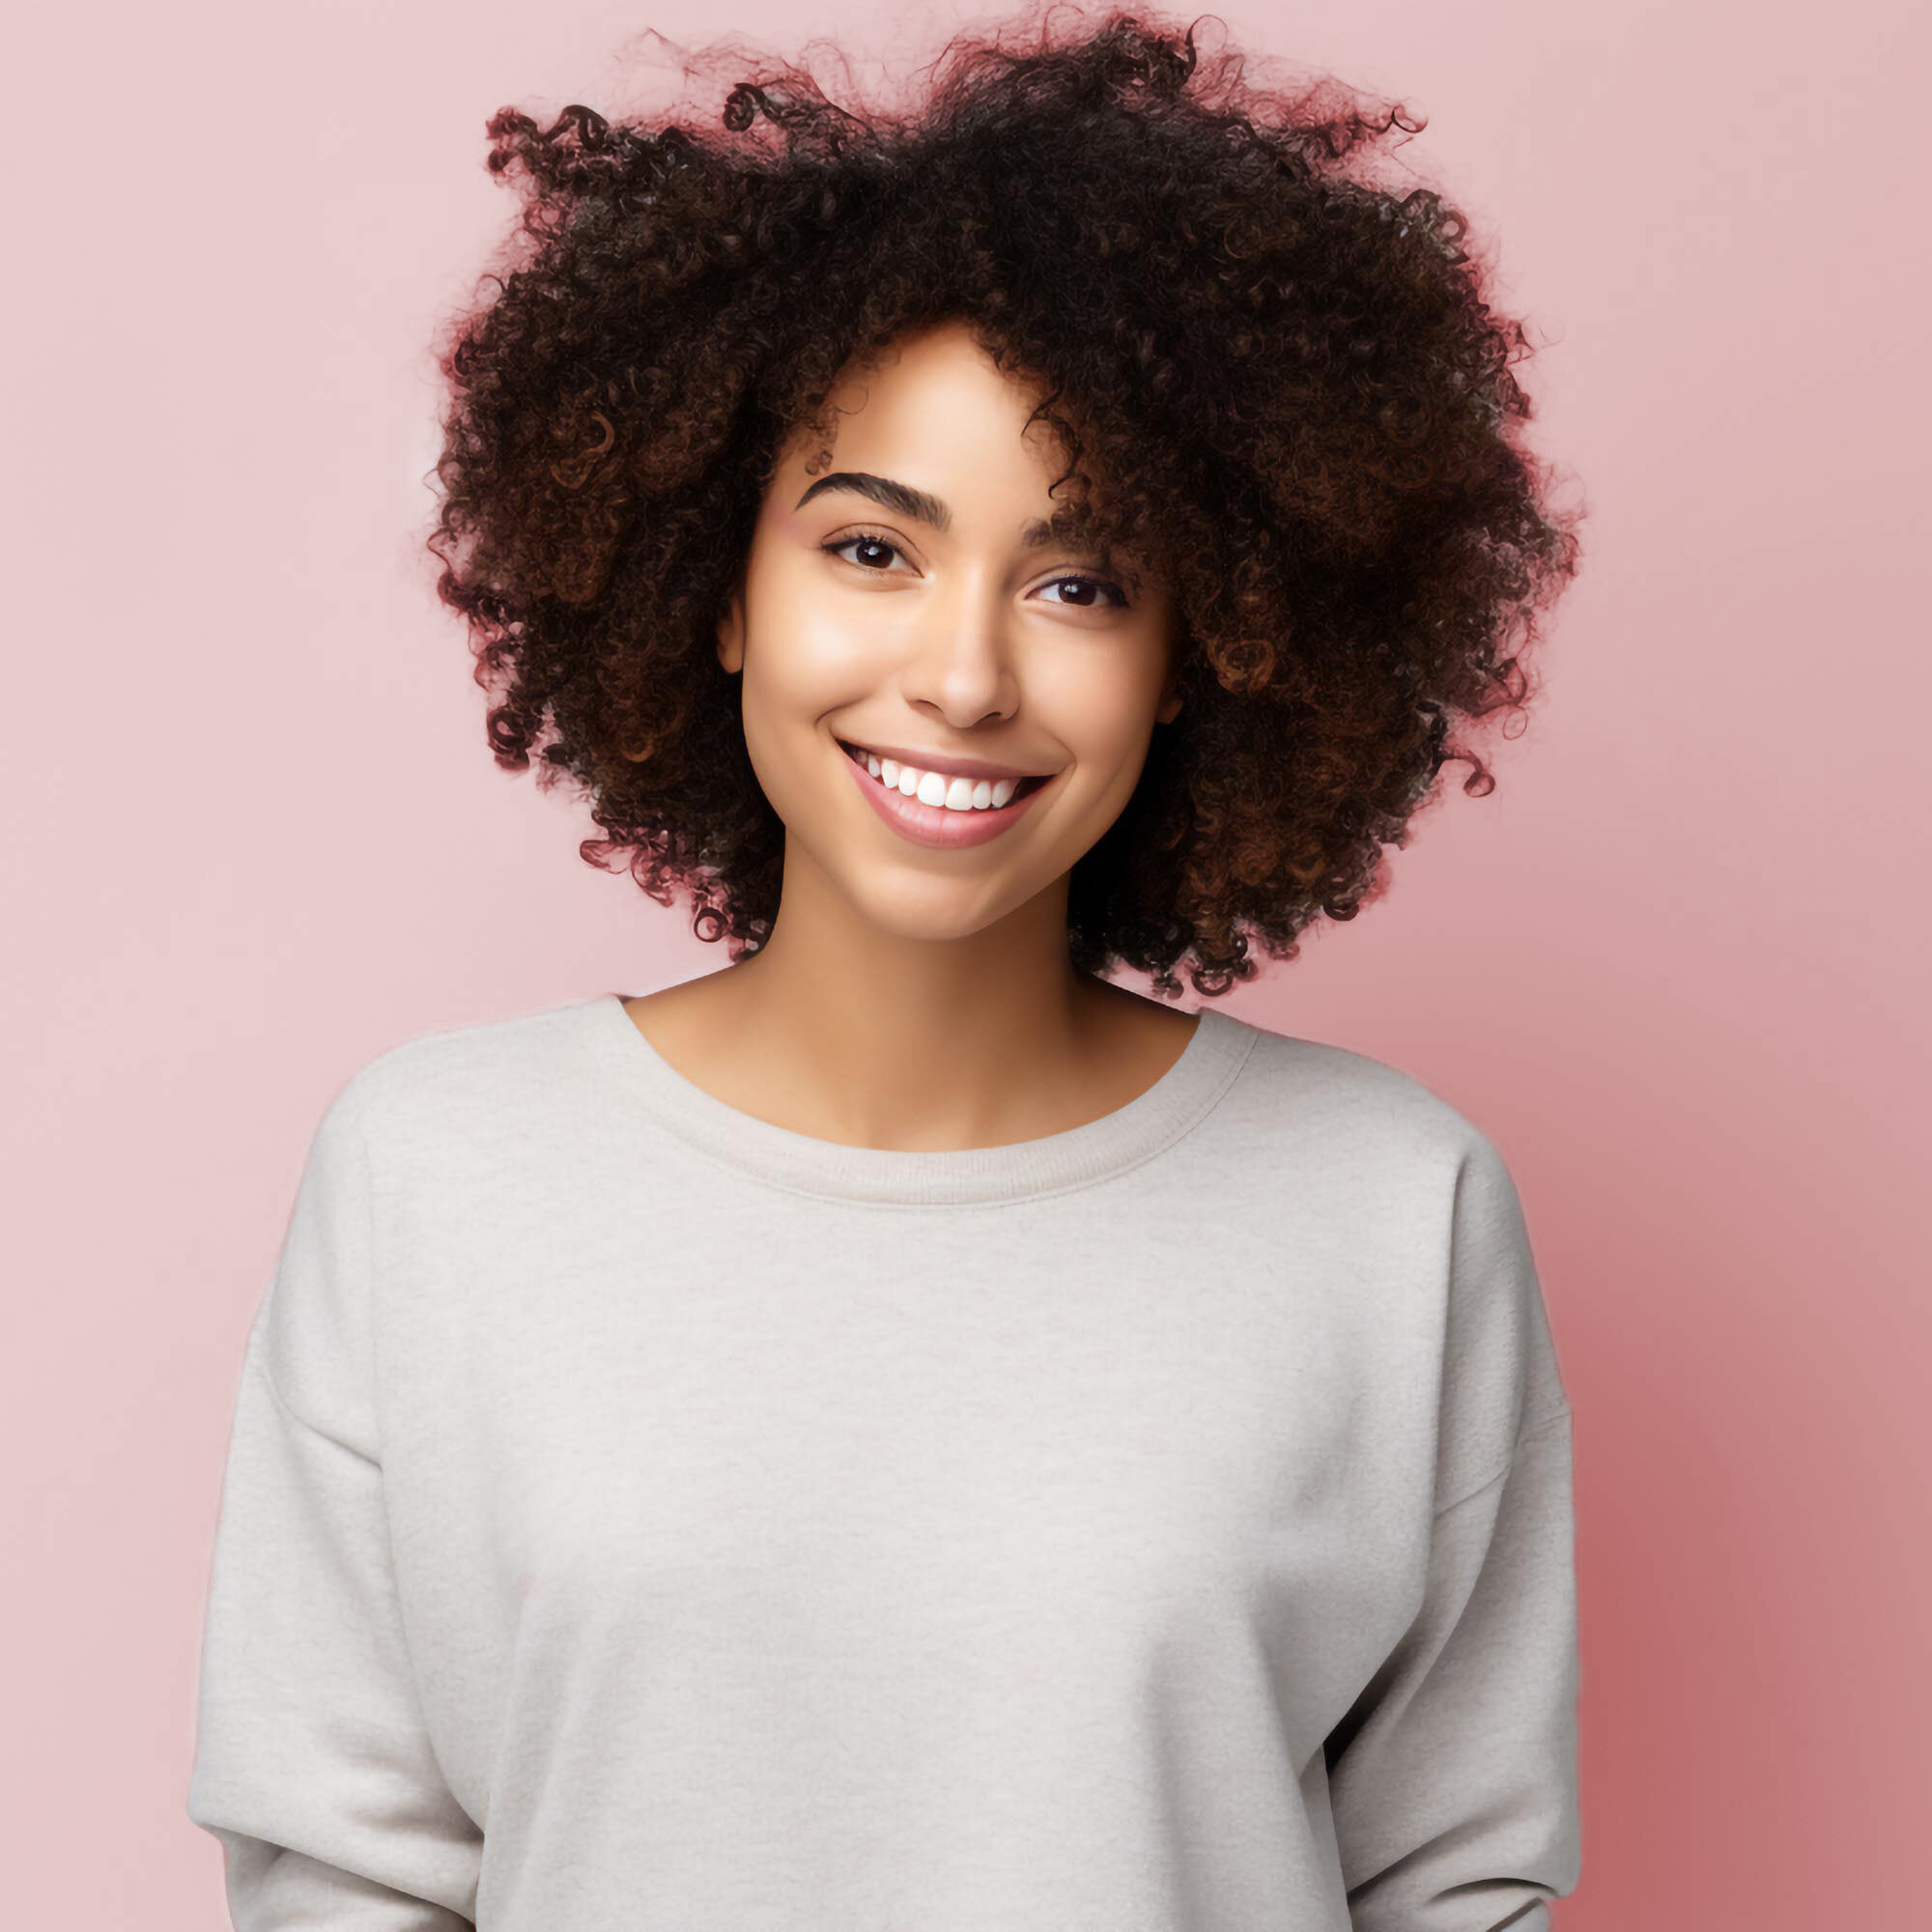 Young woman with curly hair wearing a light gray sweater on a pink background.